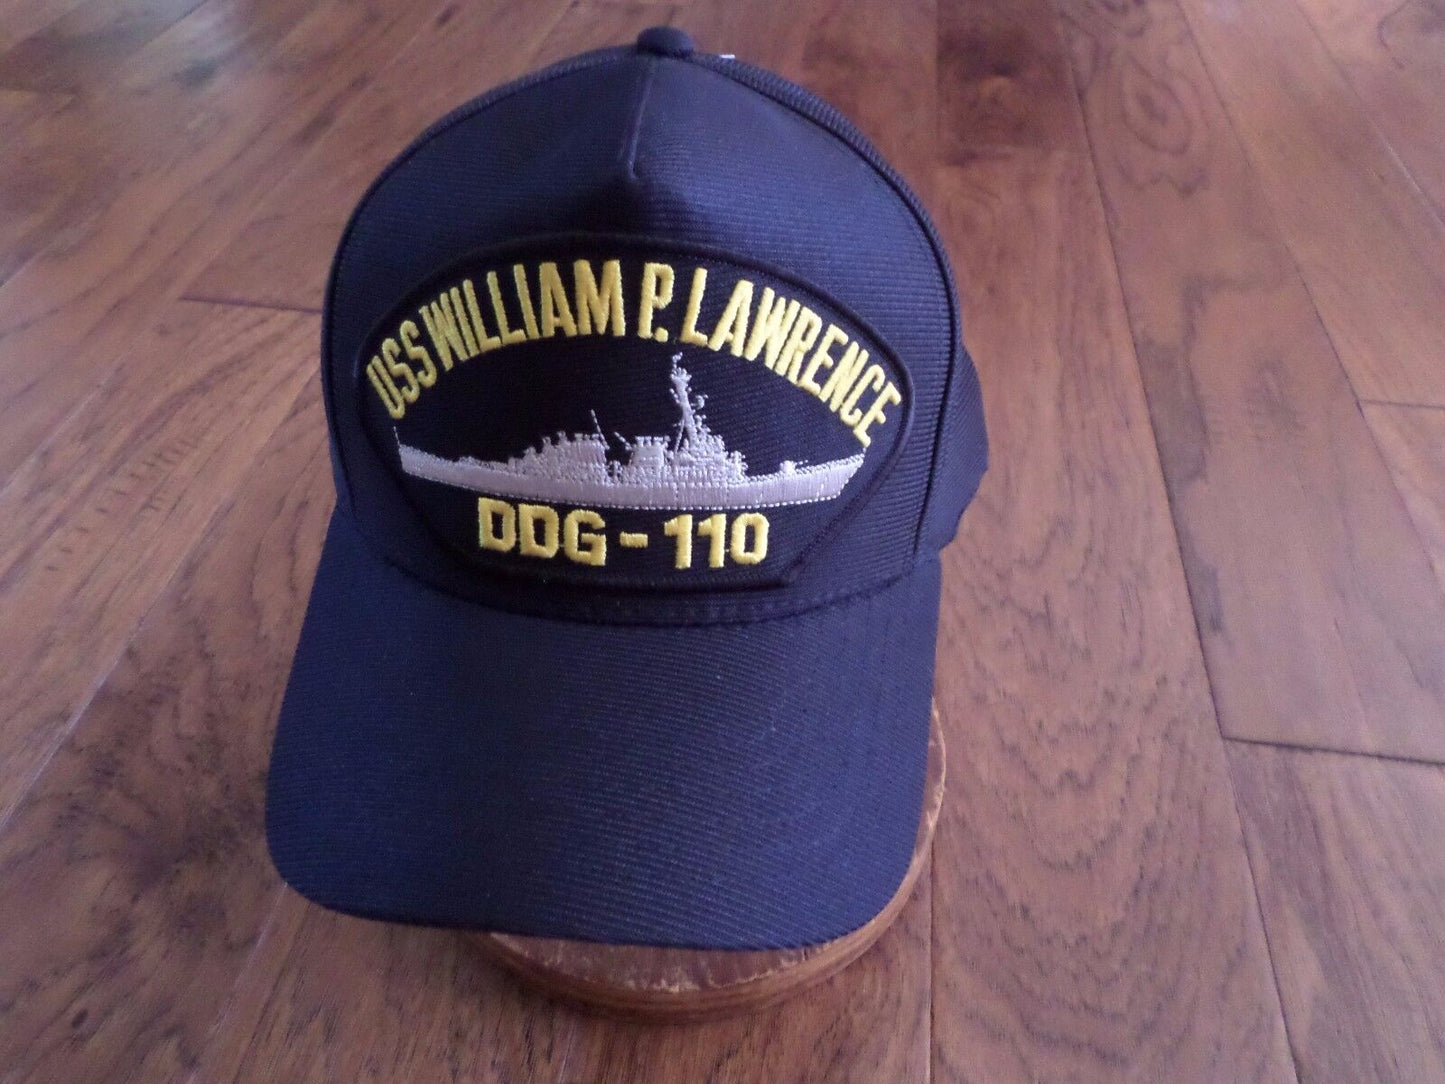 USS WILLIAM P LAWRENCE DDG-110 NAVY SHIP HAT U.S MILITARY OFFICIAL BALL CAP USA